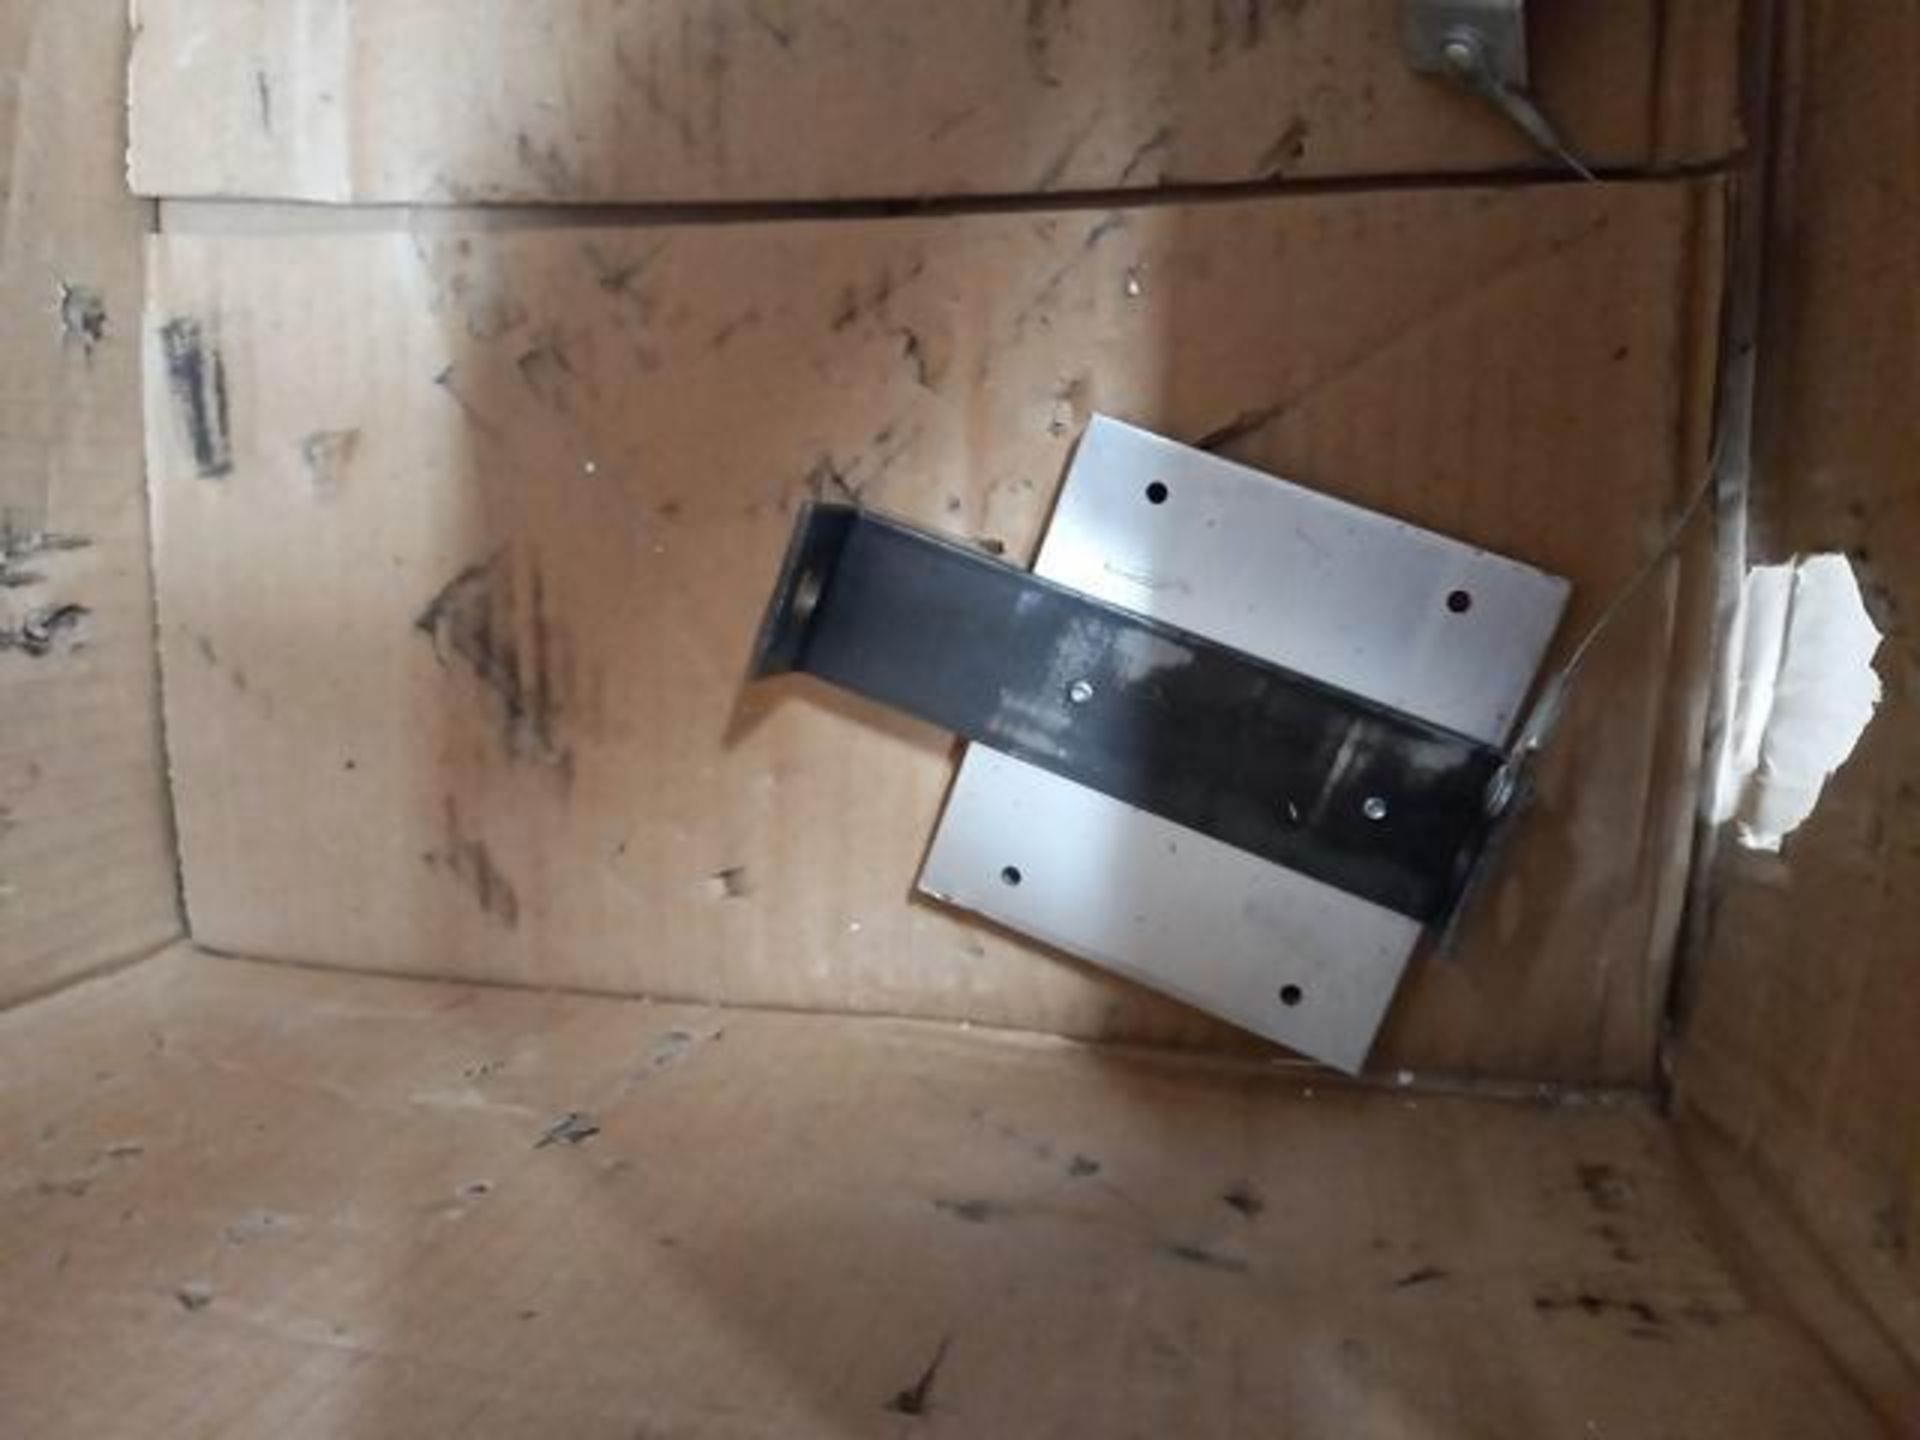 LOT: Miscellaneous Materials And Fittings: (703) Pieces Of Leg Mechanism Slide-In Bracket, (1187) - Image 16 of 20